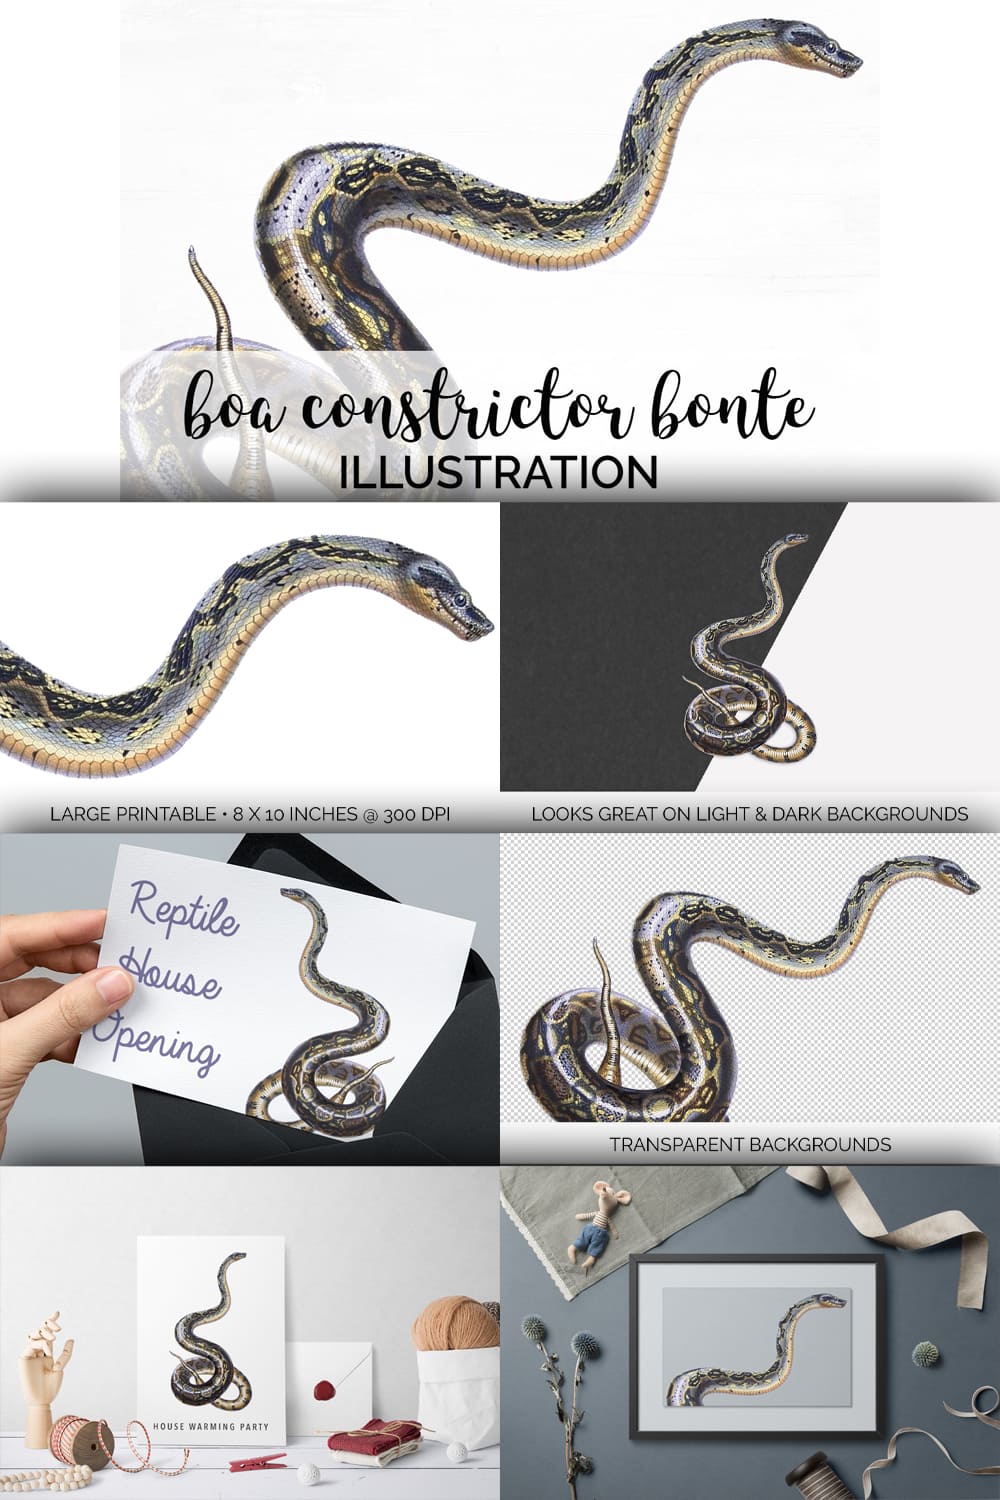 Colorful set of images with boa constrictor bonte.